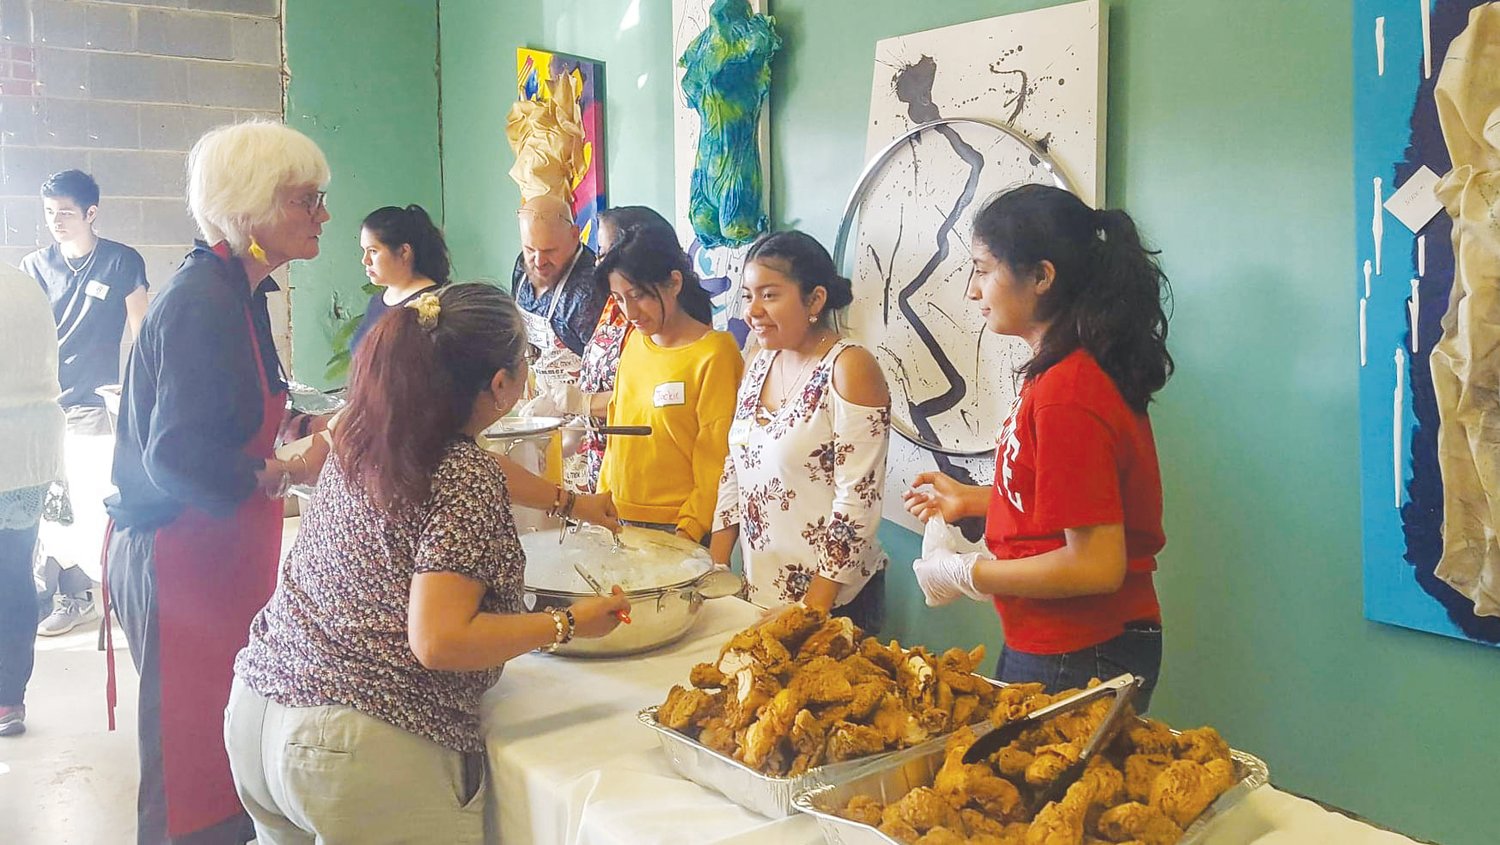 Members of the Hispanic Liaison’s youth group, Orgullo Latinx Pride, help out during the community dinner held annually at Peppercorn in the fall.